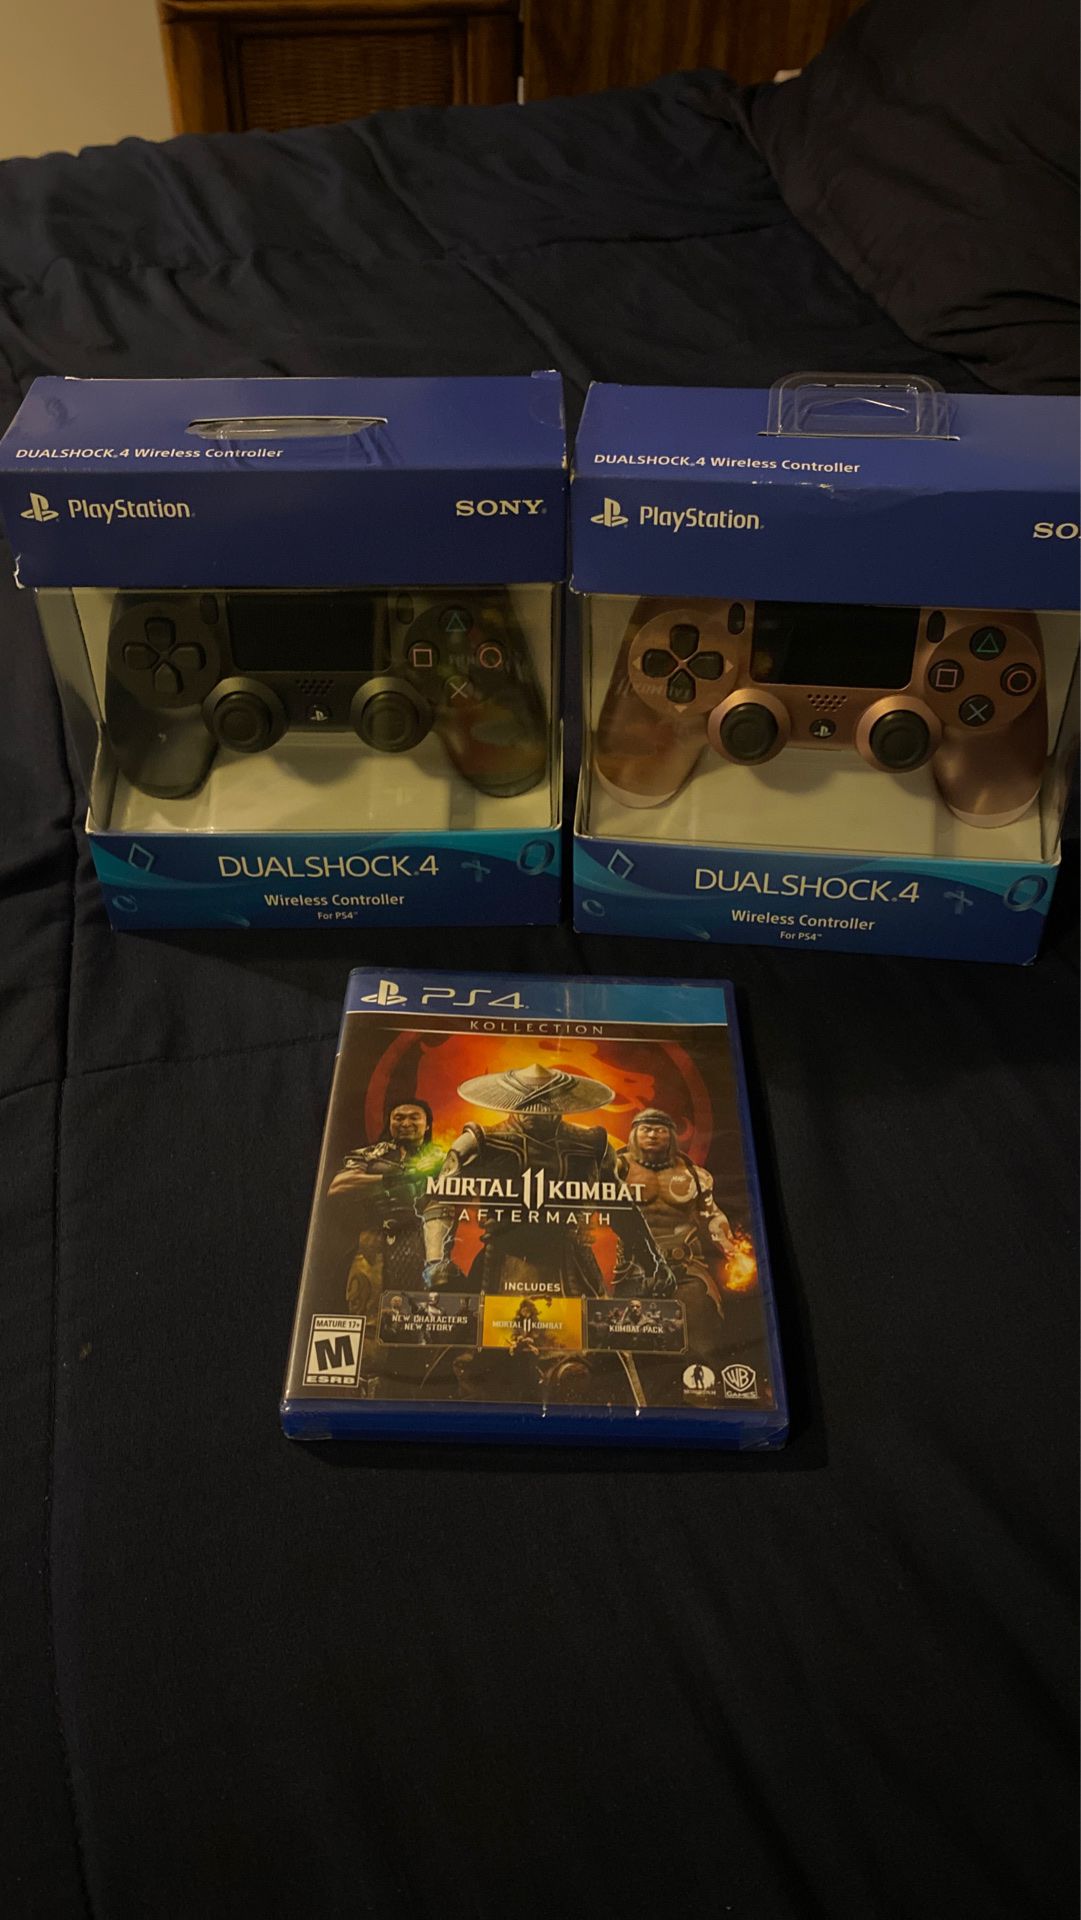 Mortal Kombat 11 for PS4 With 2 PS4 Wireless Controllers in Rose Gold and Steel Black